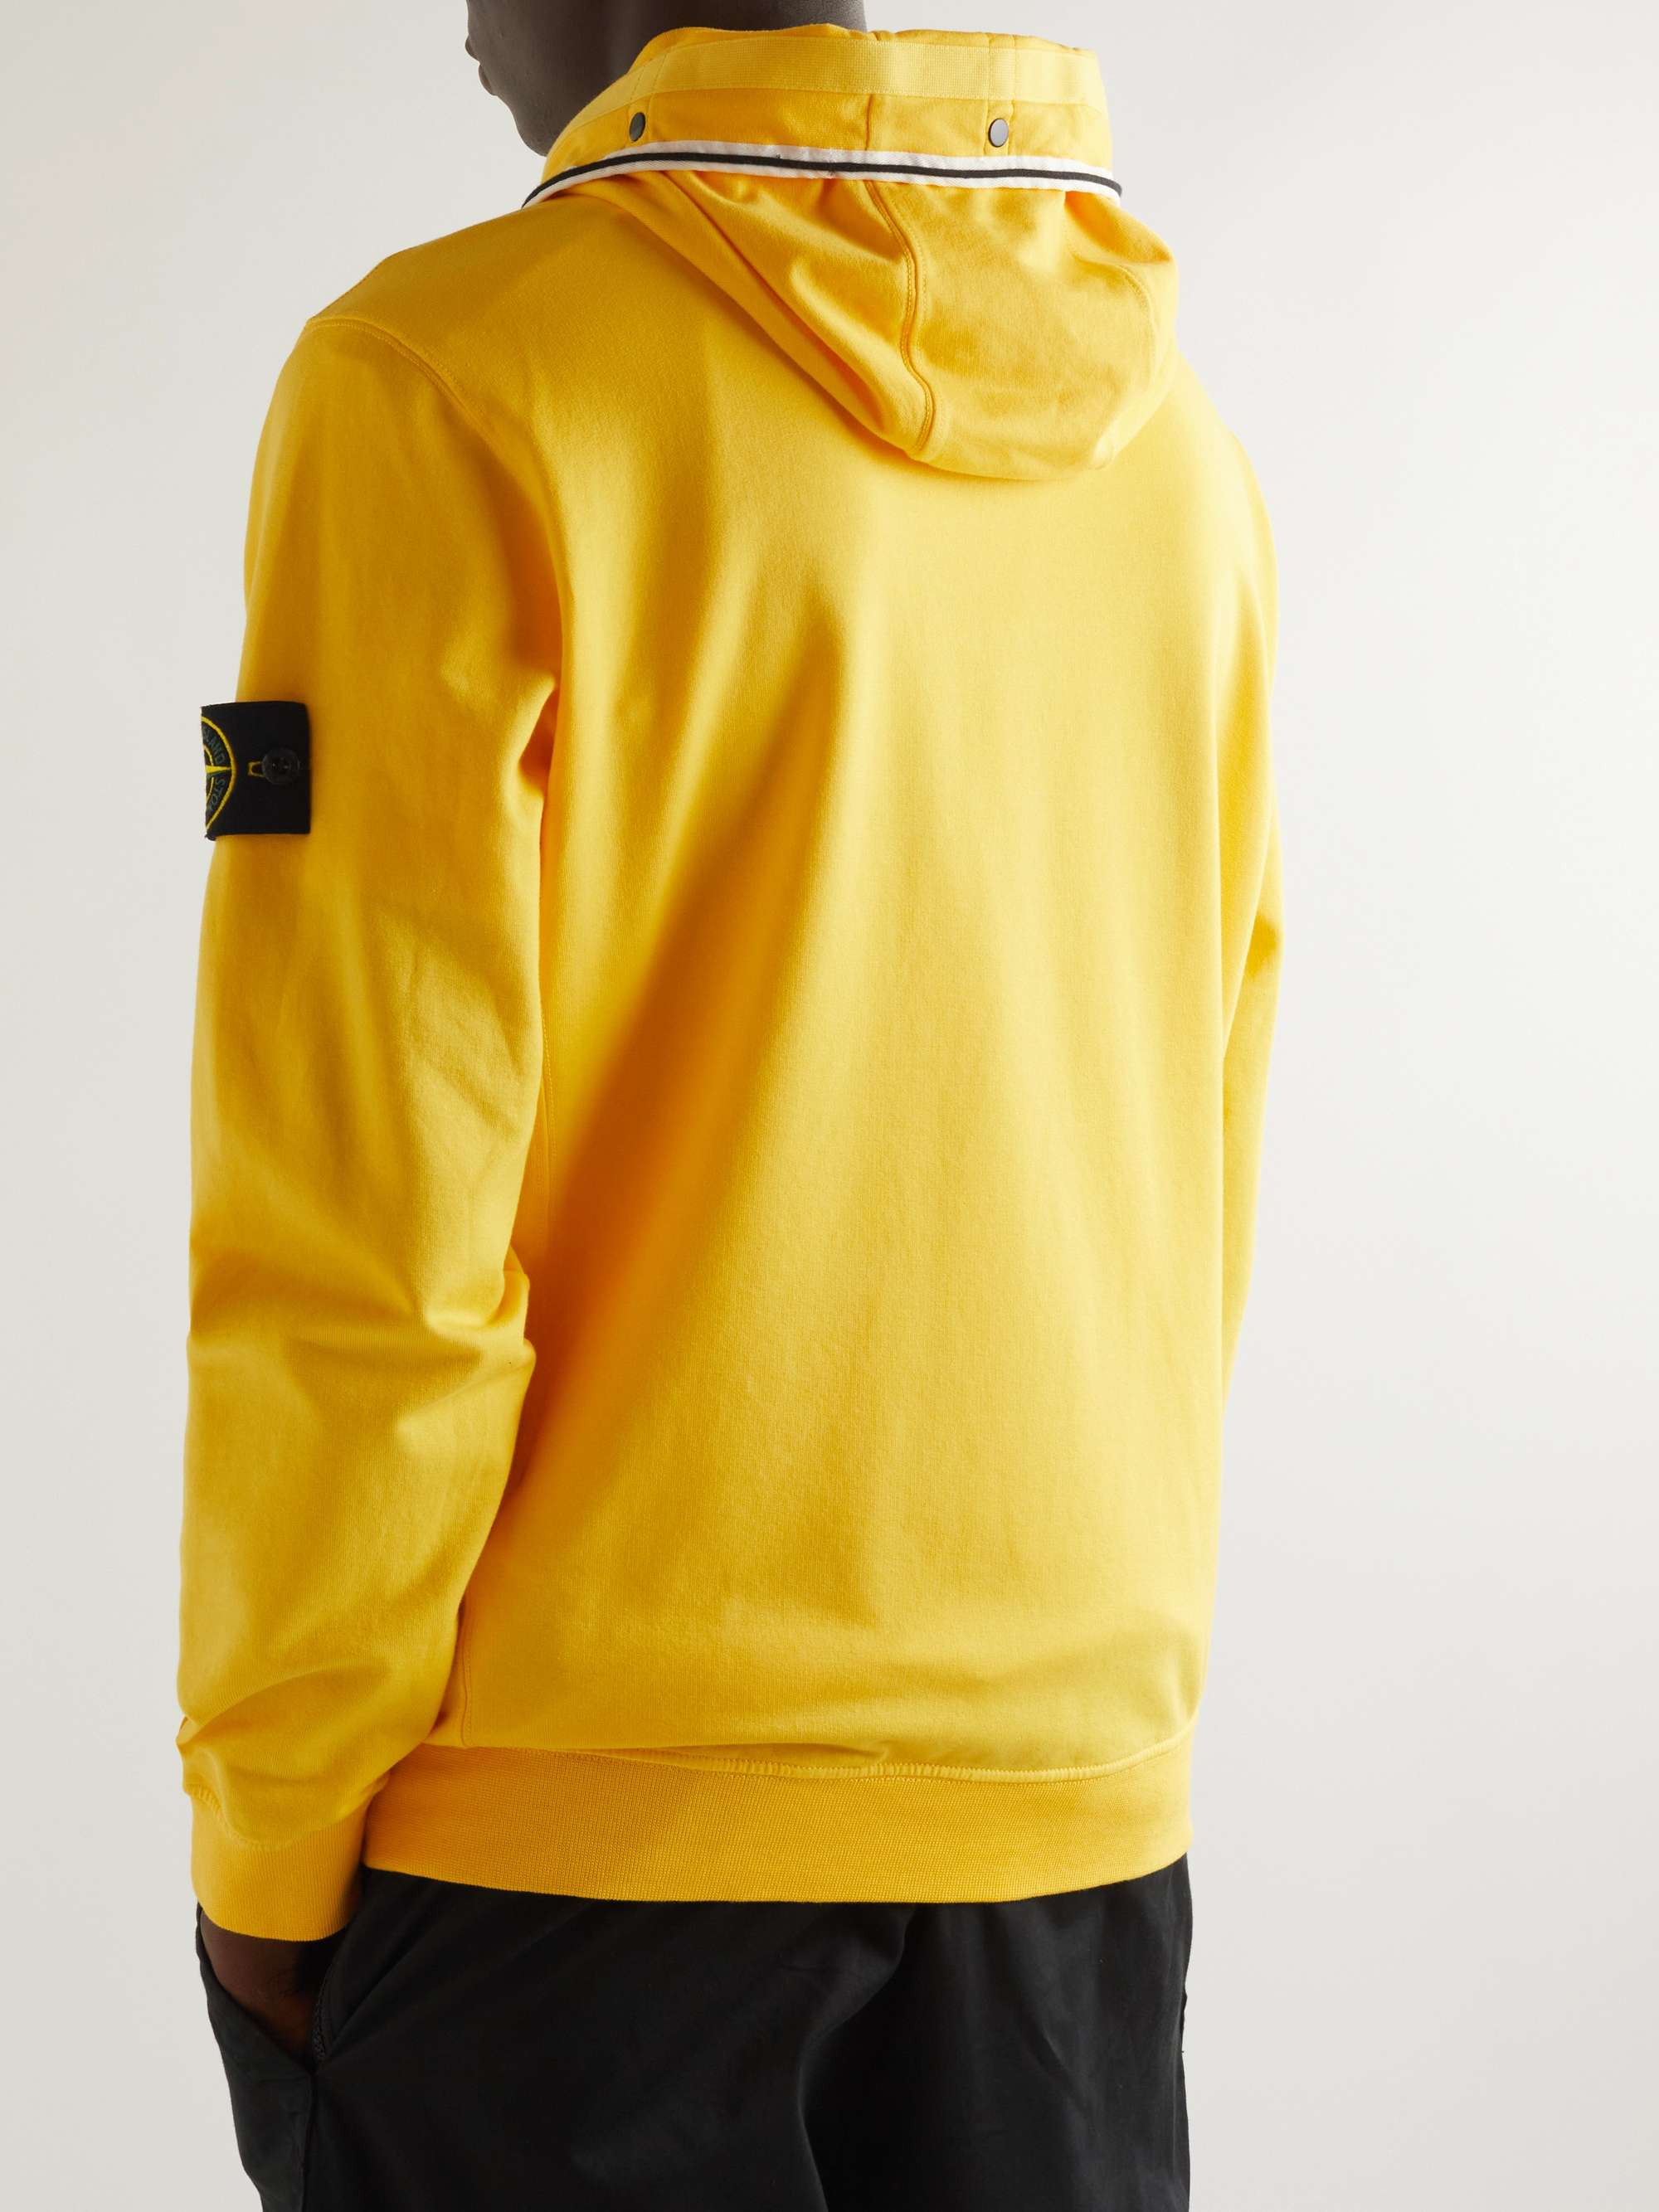 STONE ISLAND Logo-Embroidered Cotton-Blend Jersey Hoodie